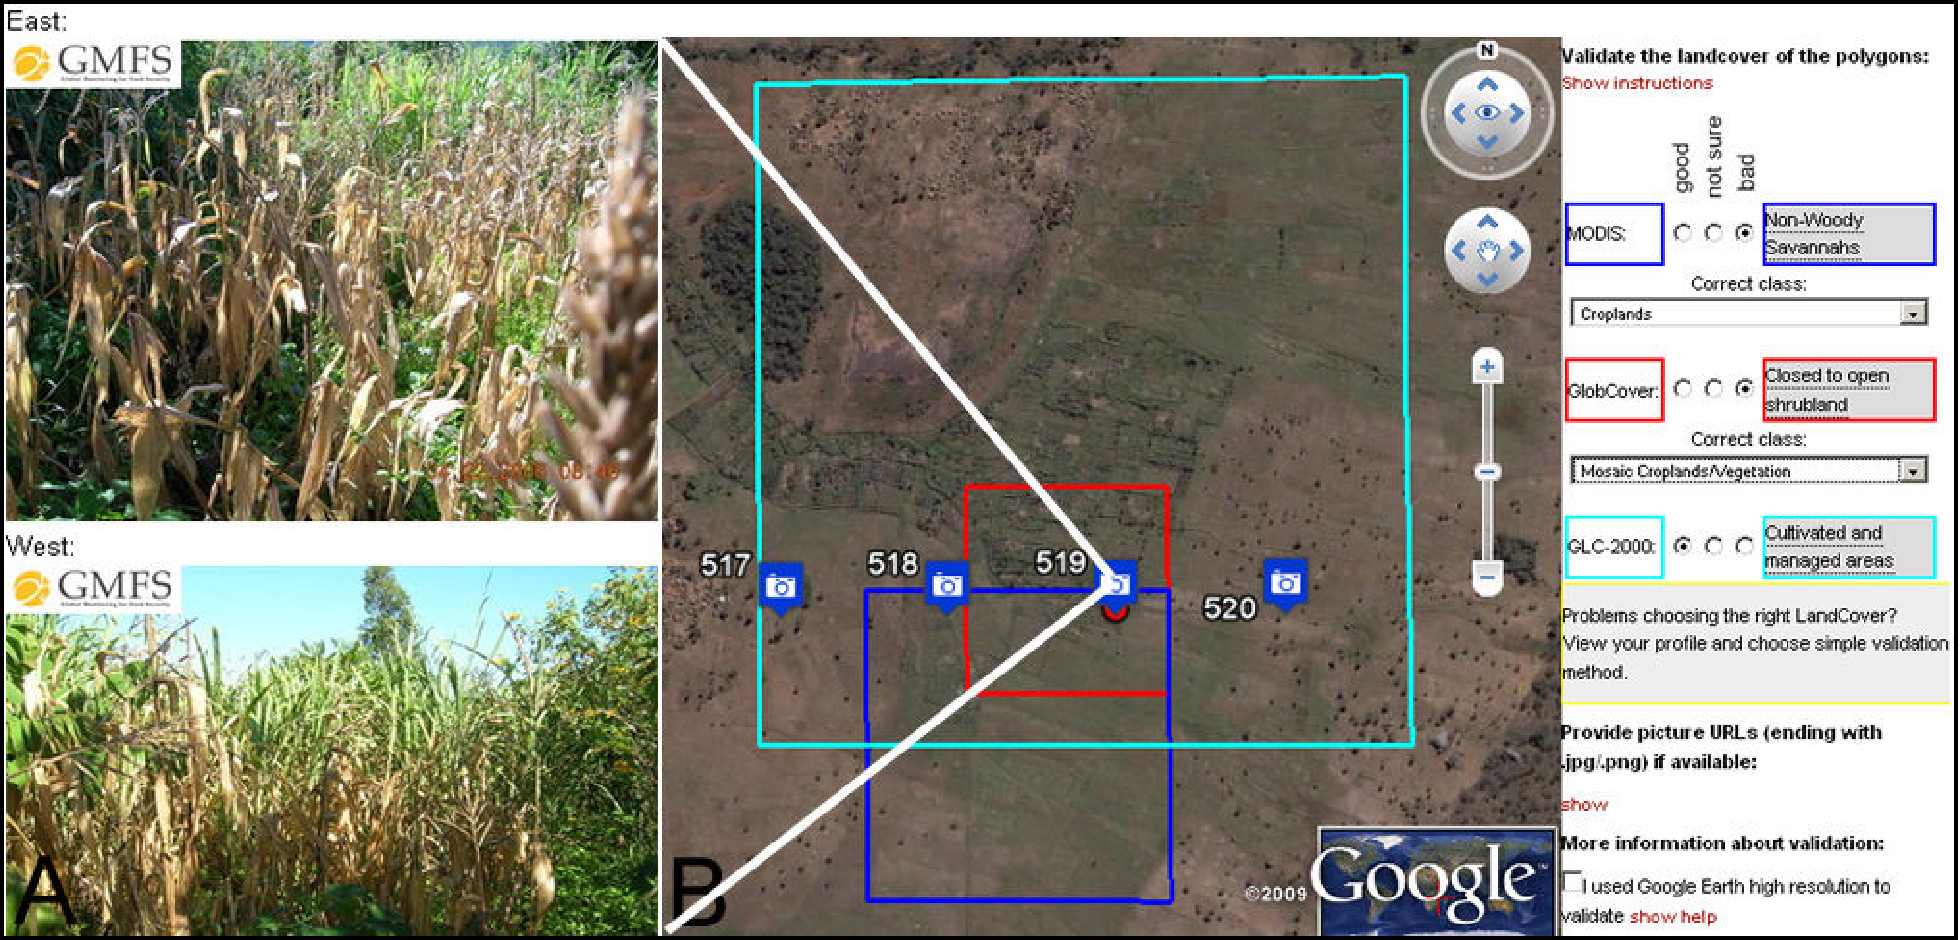 Figure 3. Geo-tagged photos uploaded in geo-wiki.org (A) confirming the actual land cover seen in Google Earth high resolution images (B). Using the high resolution images available in Google Earth, in combination with available photos, a volunteer can correct existing land cover products. This combination of information sources, together with user input through the geo-wiki.org interface, creates a very powerful validation source.